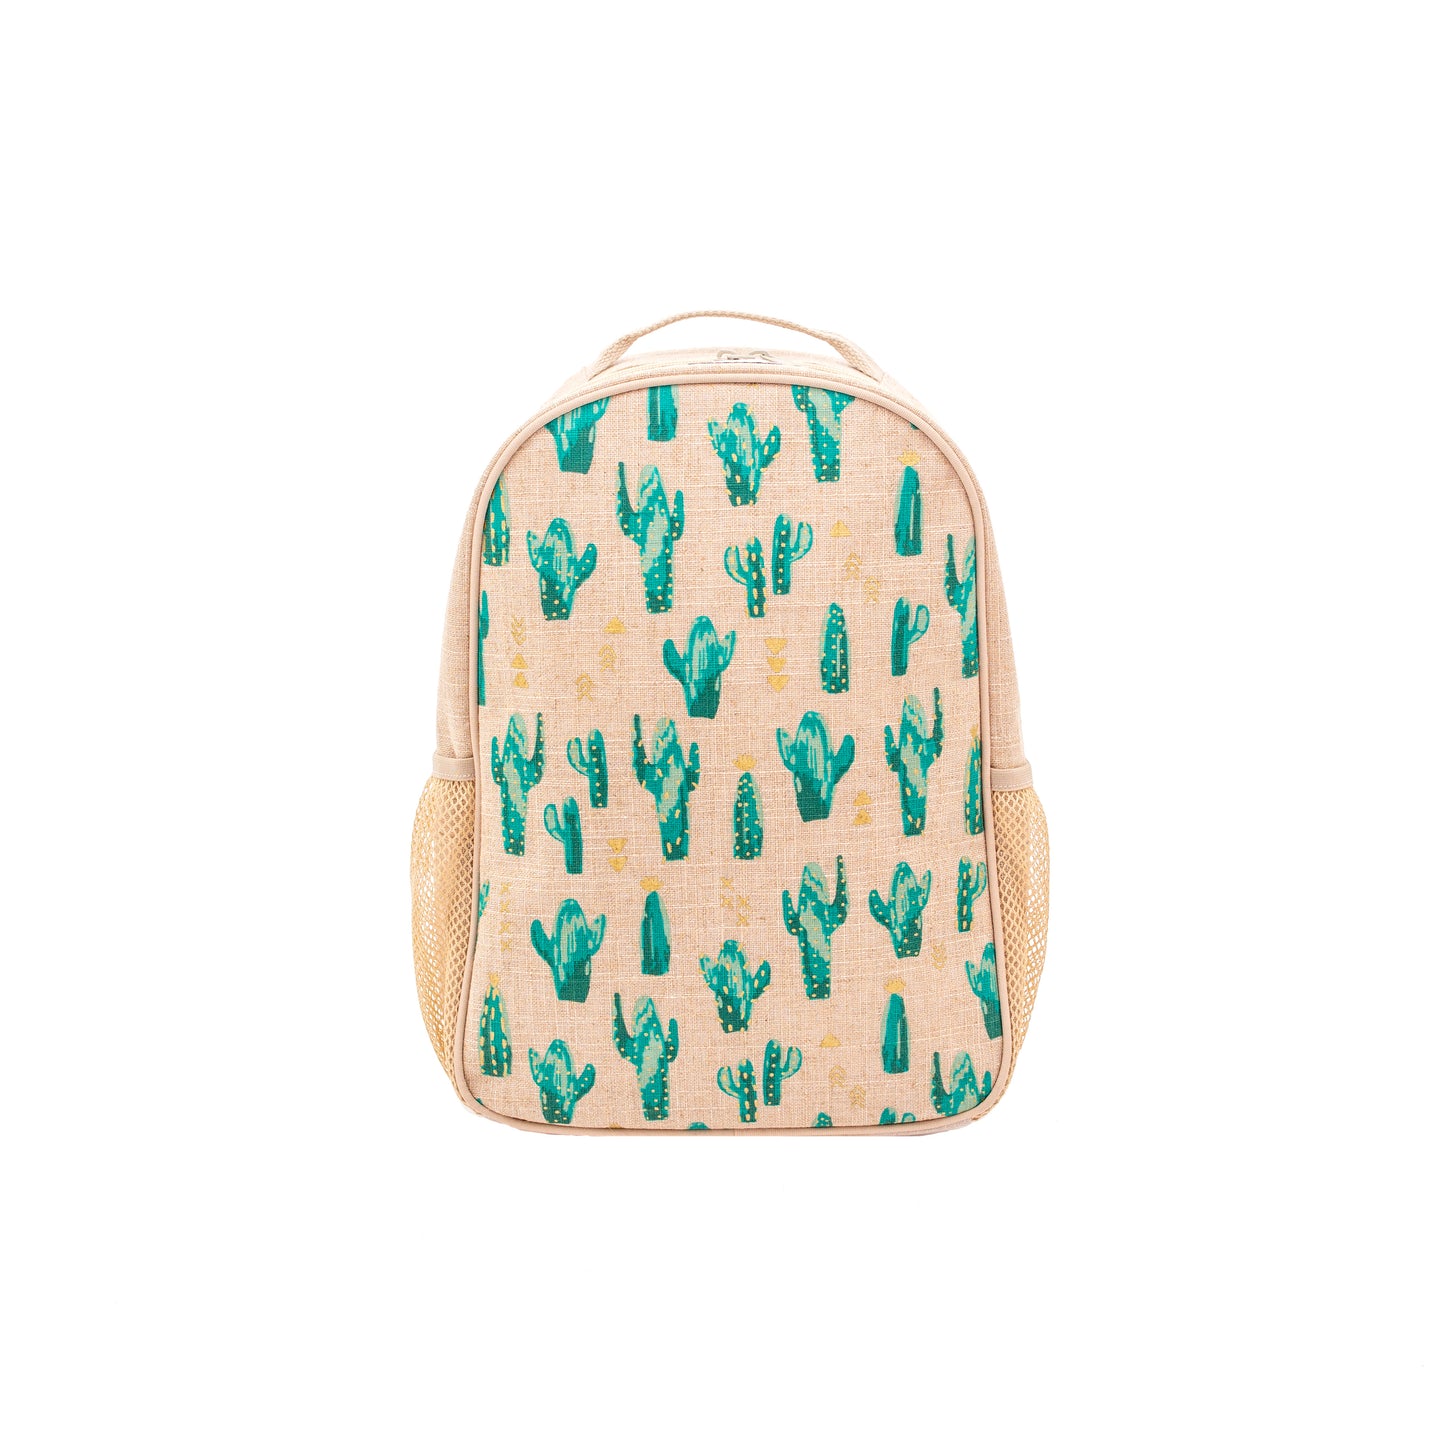 So Young Toddler Backpack - Cacti Desert (Final Sale)